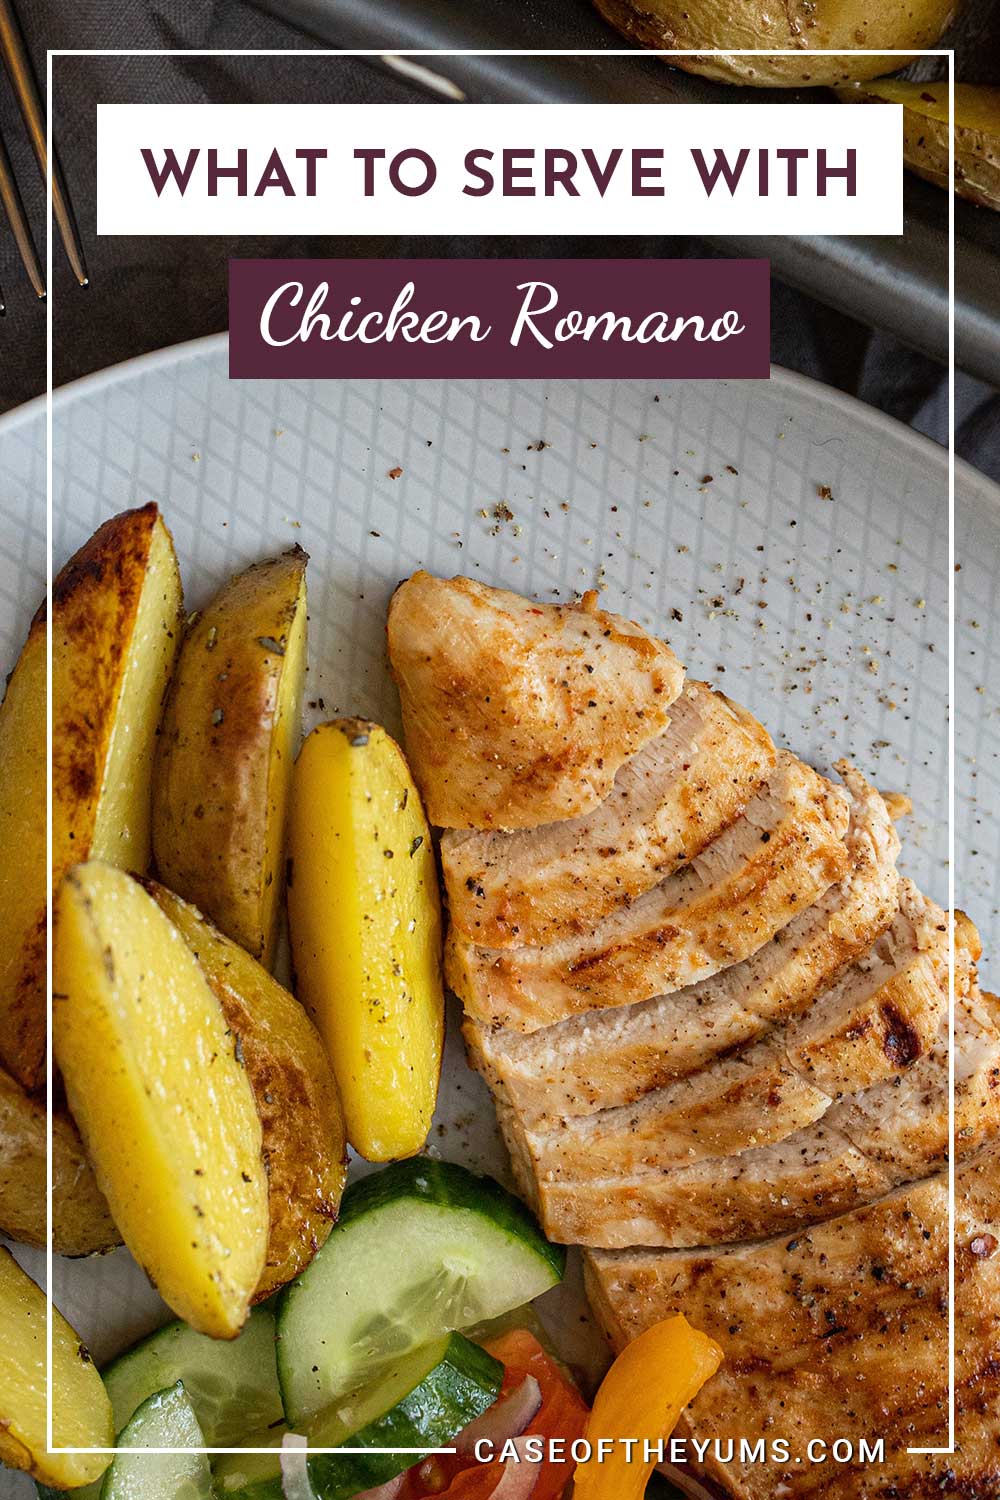 Chicken Romano, Roasted Potato and Cucumber on a white plate - What To Serve With Chicken Romano